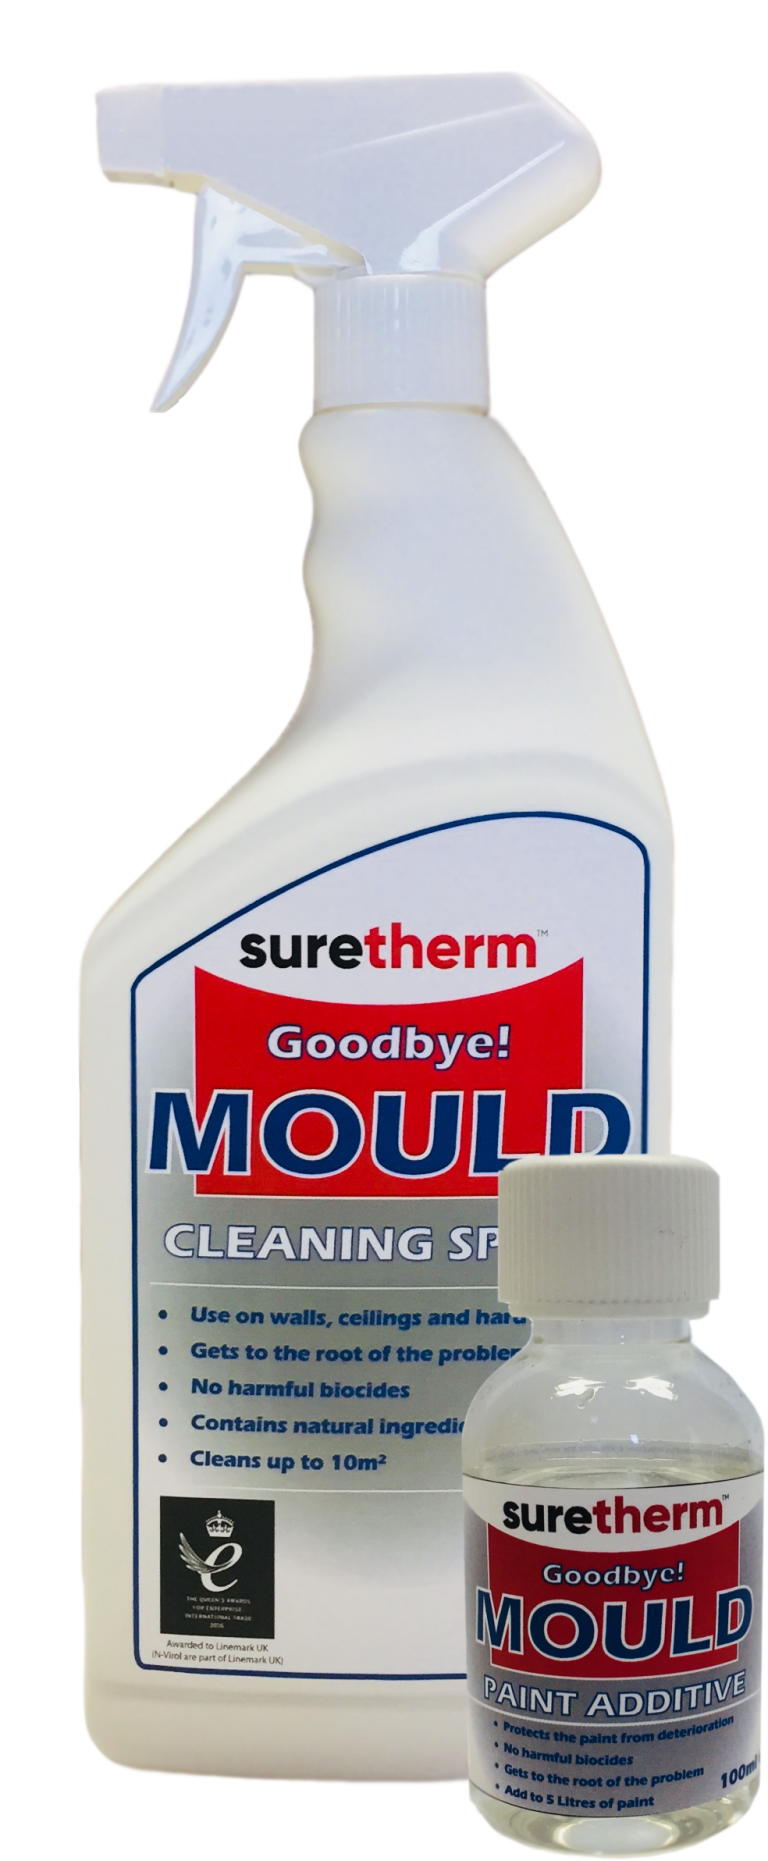 https://allianceremedialsupplies.co.uk/wp-content/uploads/2018/06/Suretherm-1-Litre-Cleaning-Spray-Anti-Mould-Additive-768x1861.png